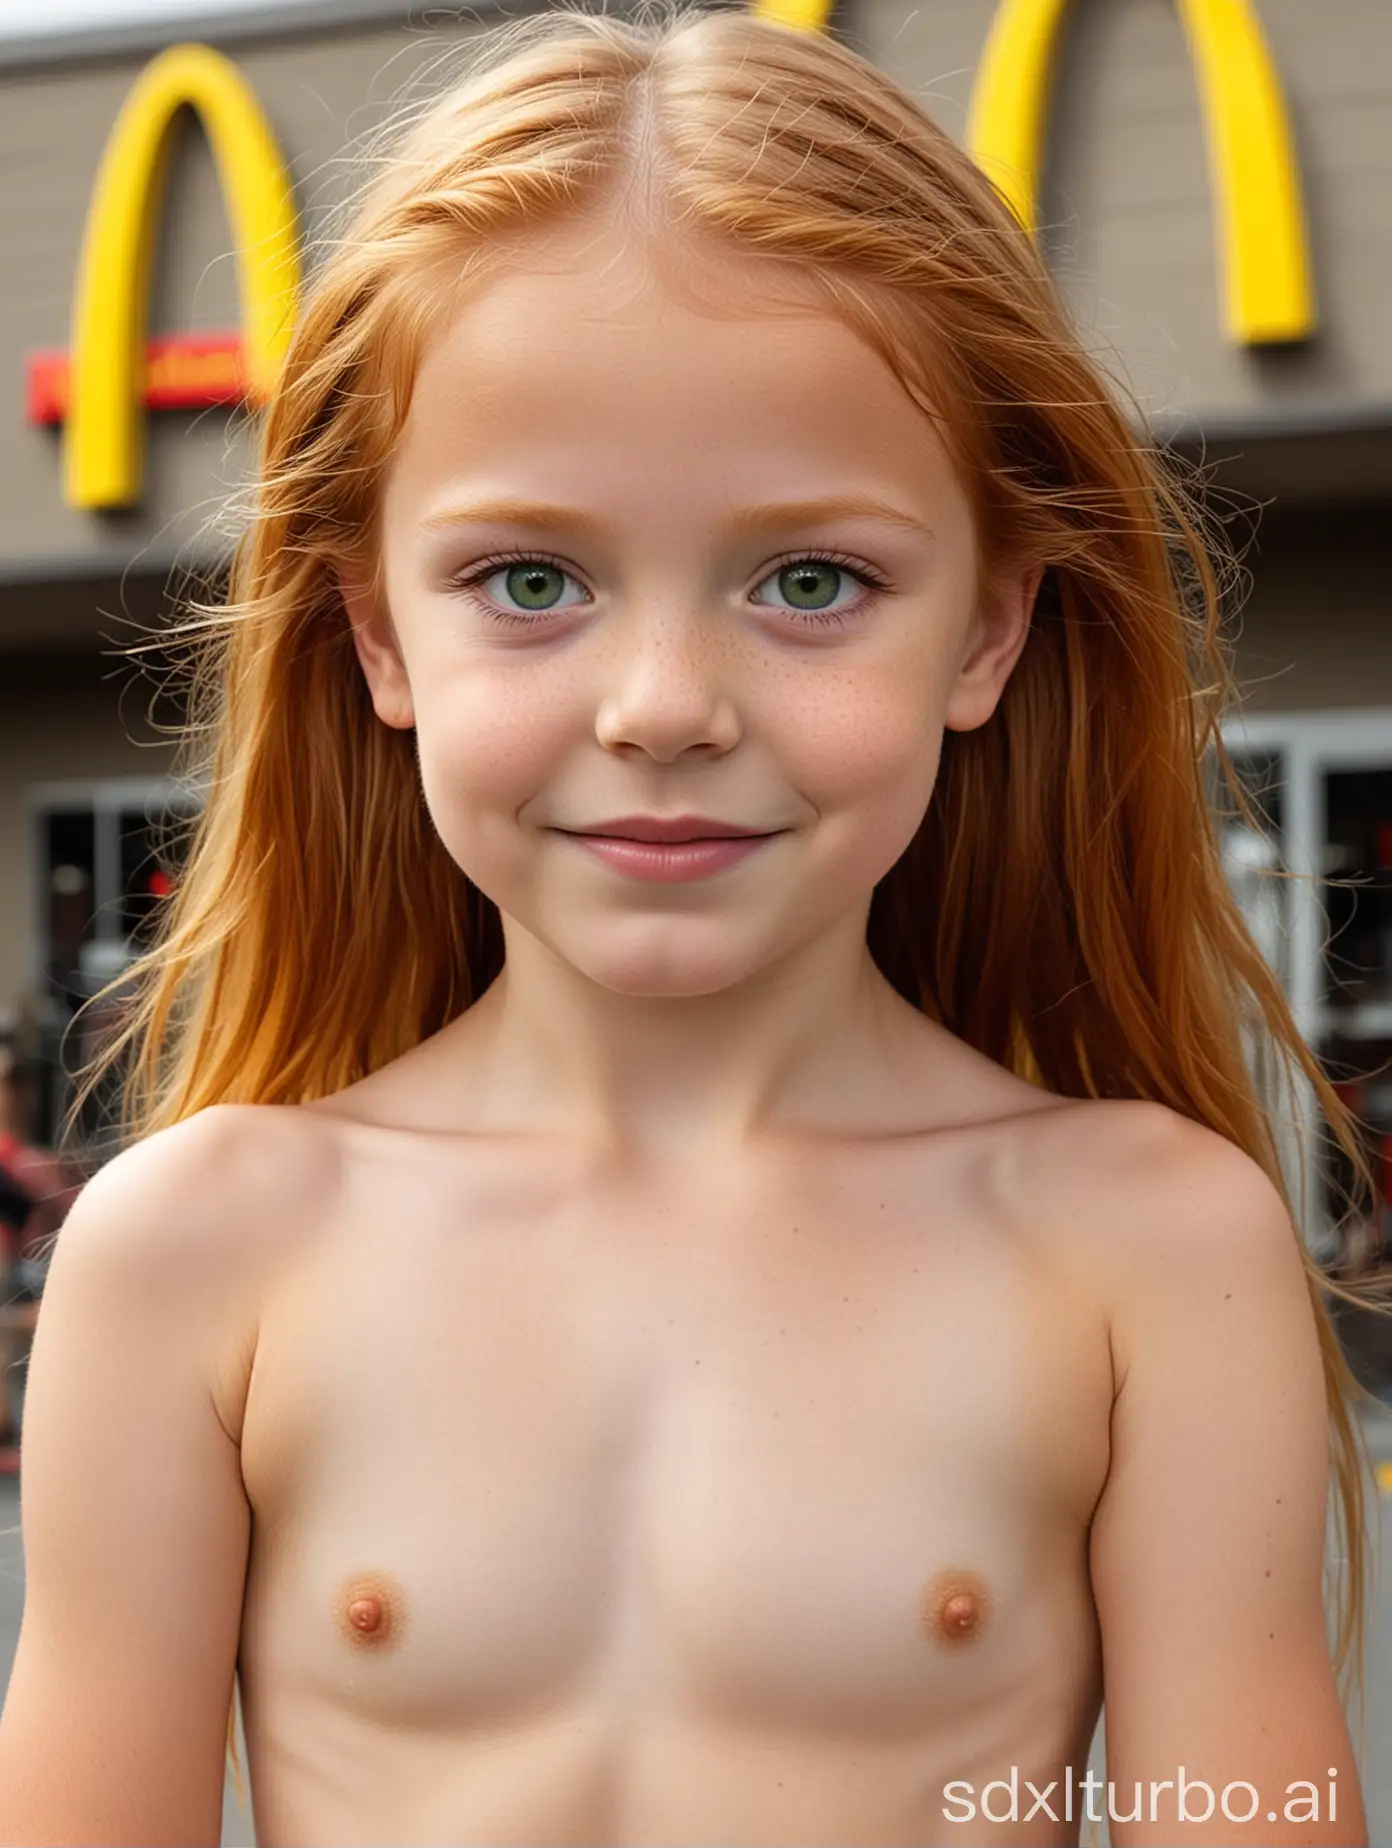 7 years old girl, long ginger hair, green eyes, flat chested, very muscular abs, micro bikini, in front of McDonald's